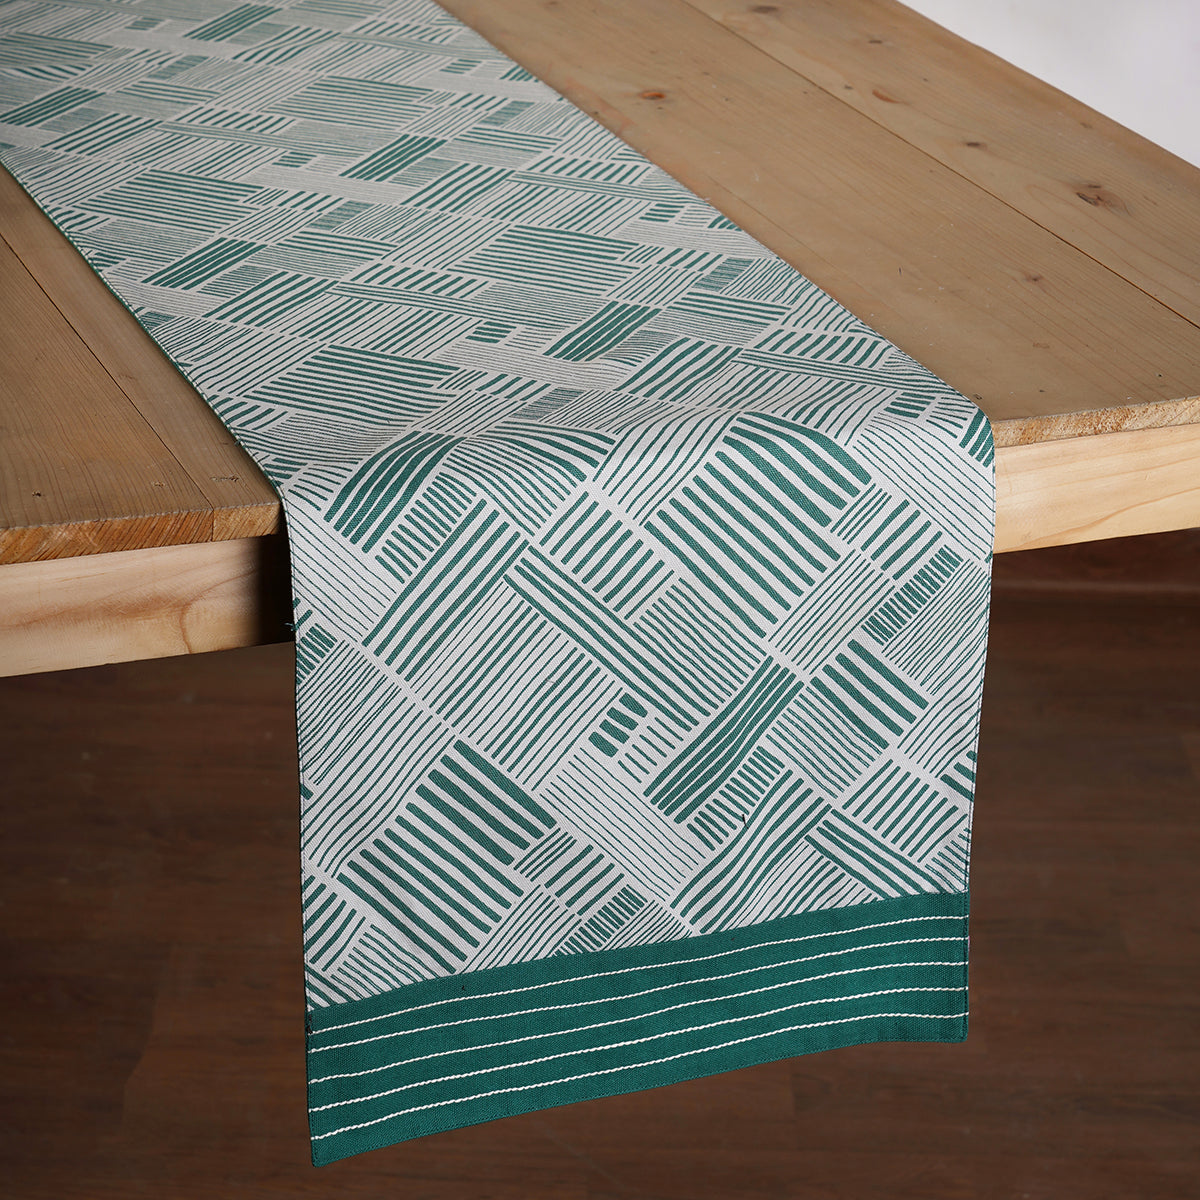 MODERN RETRO - Aqua Green cotton Table runner, stripe print with border and embroidery, sizes available